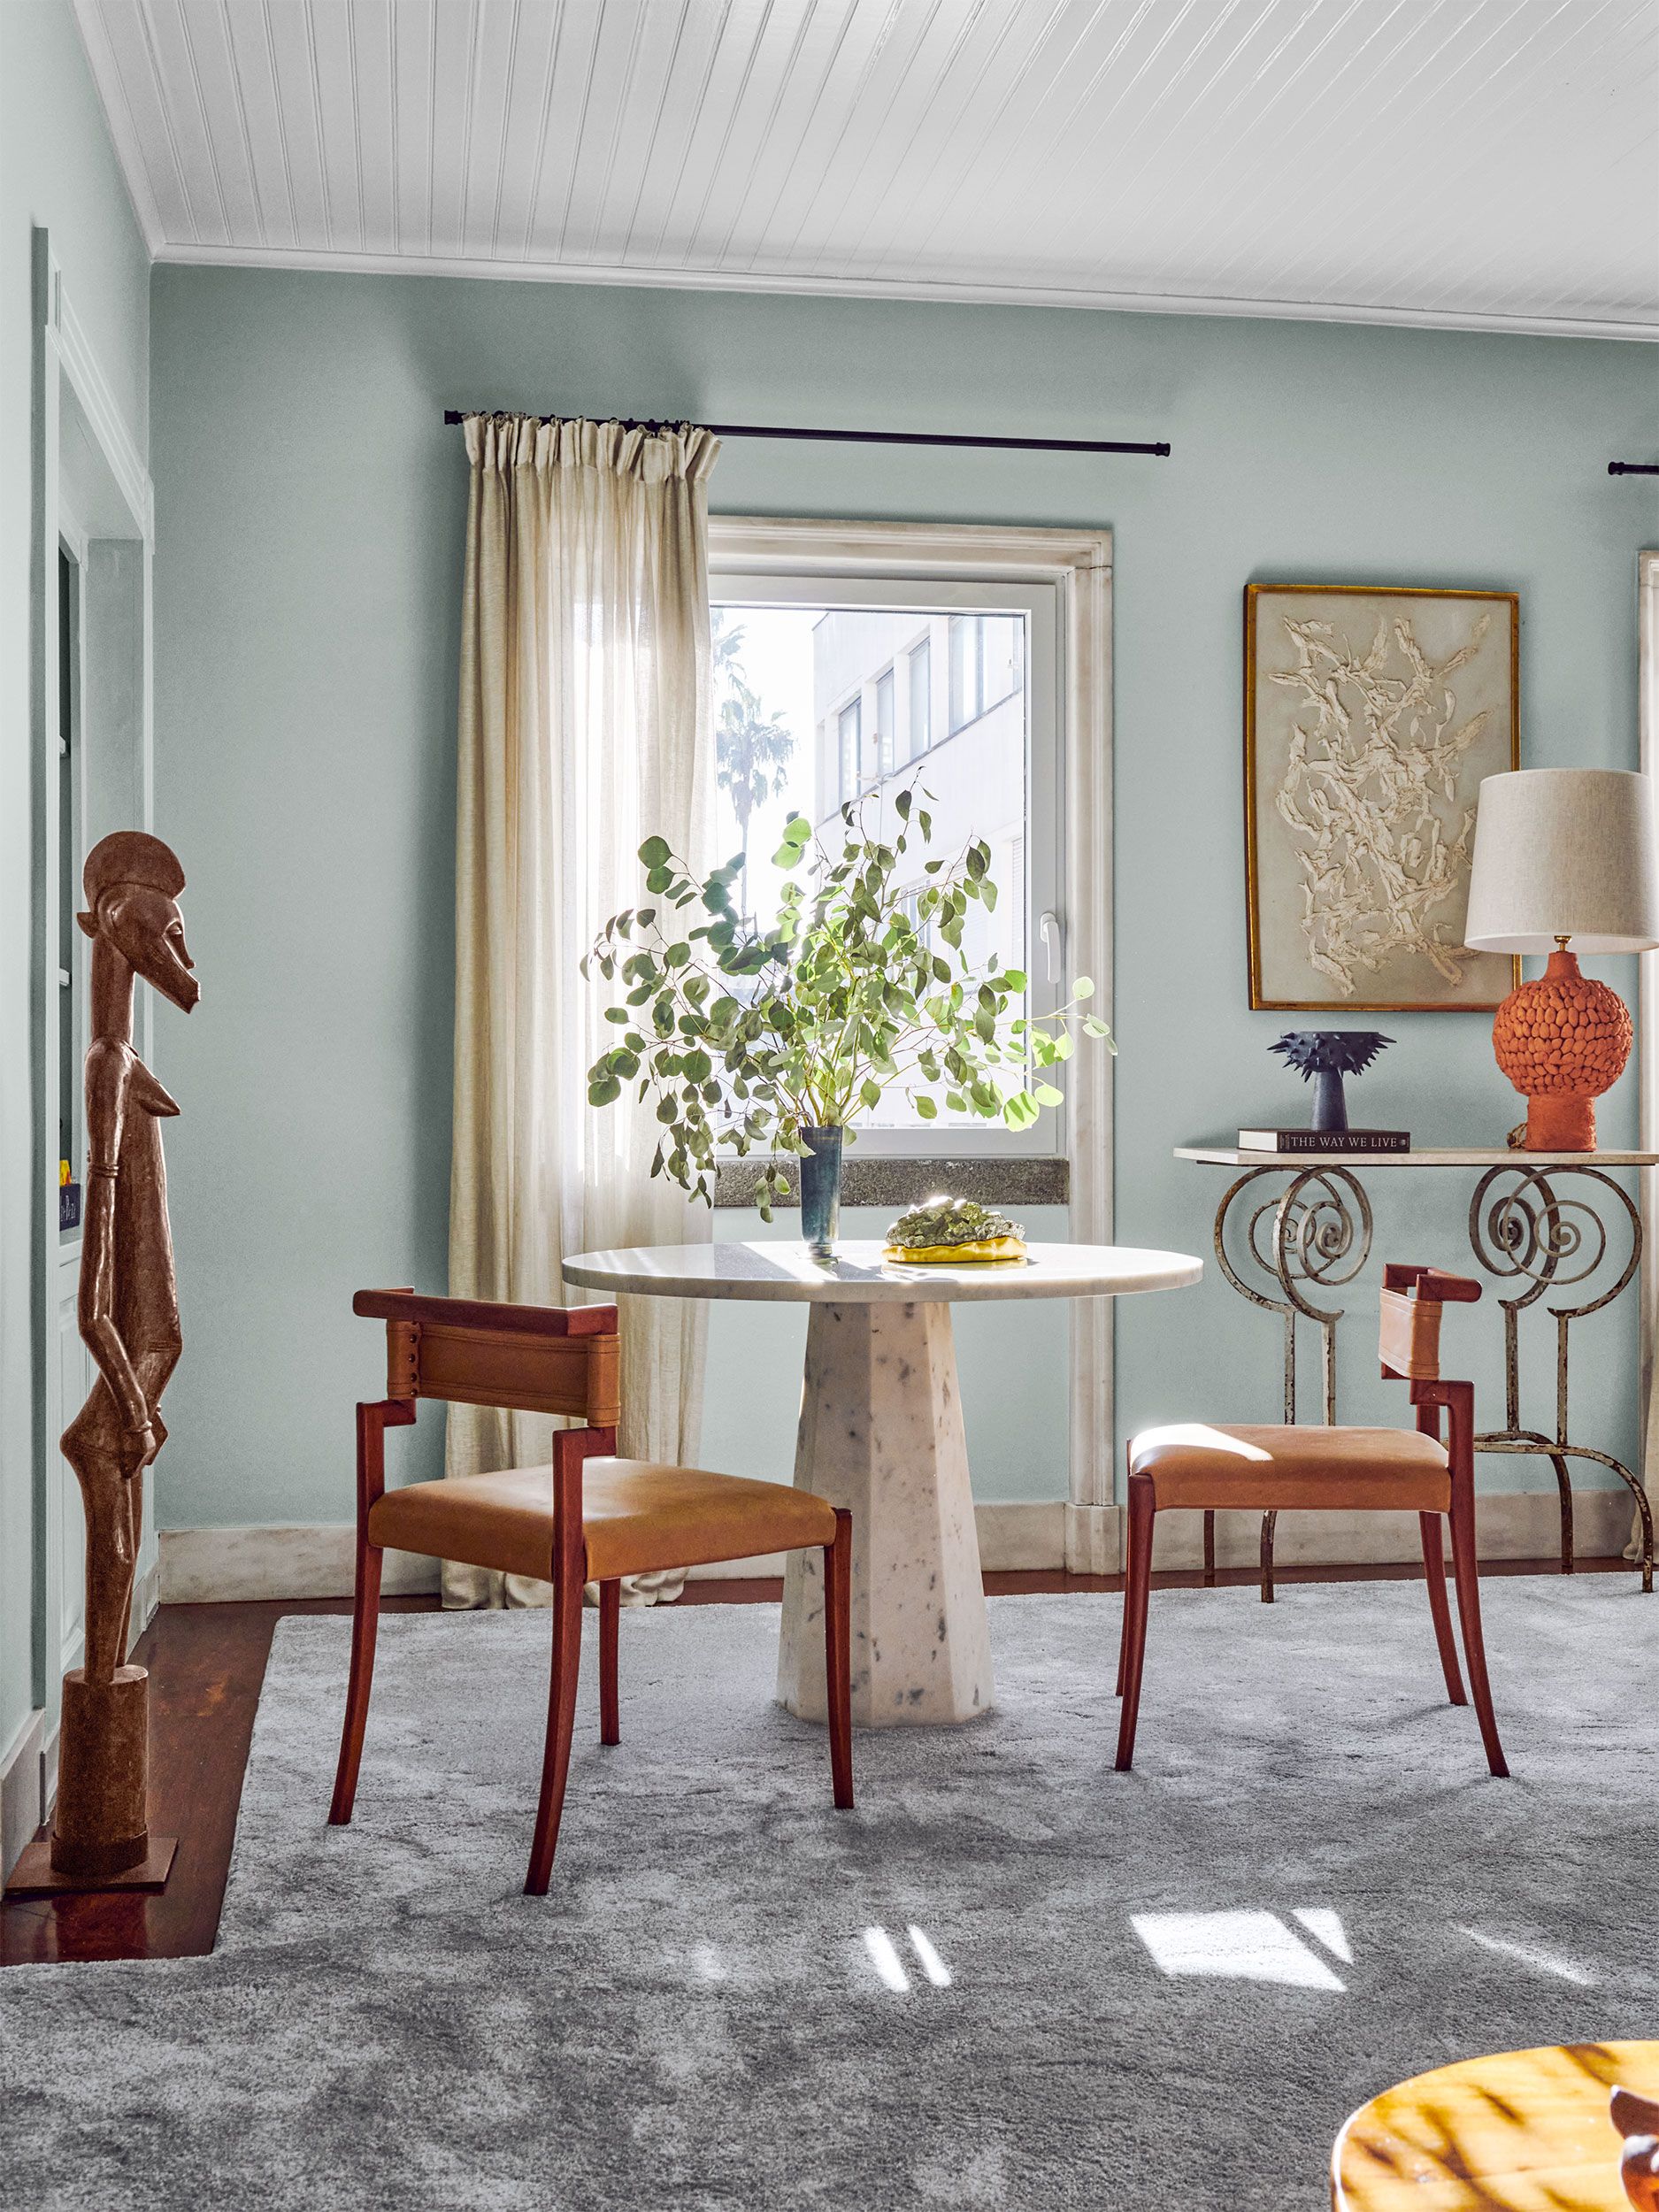 How to Use Color To Make Your Vintage Home Reflect Its History - Sonoma  Magazine